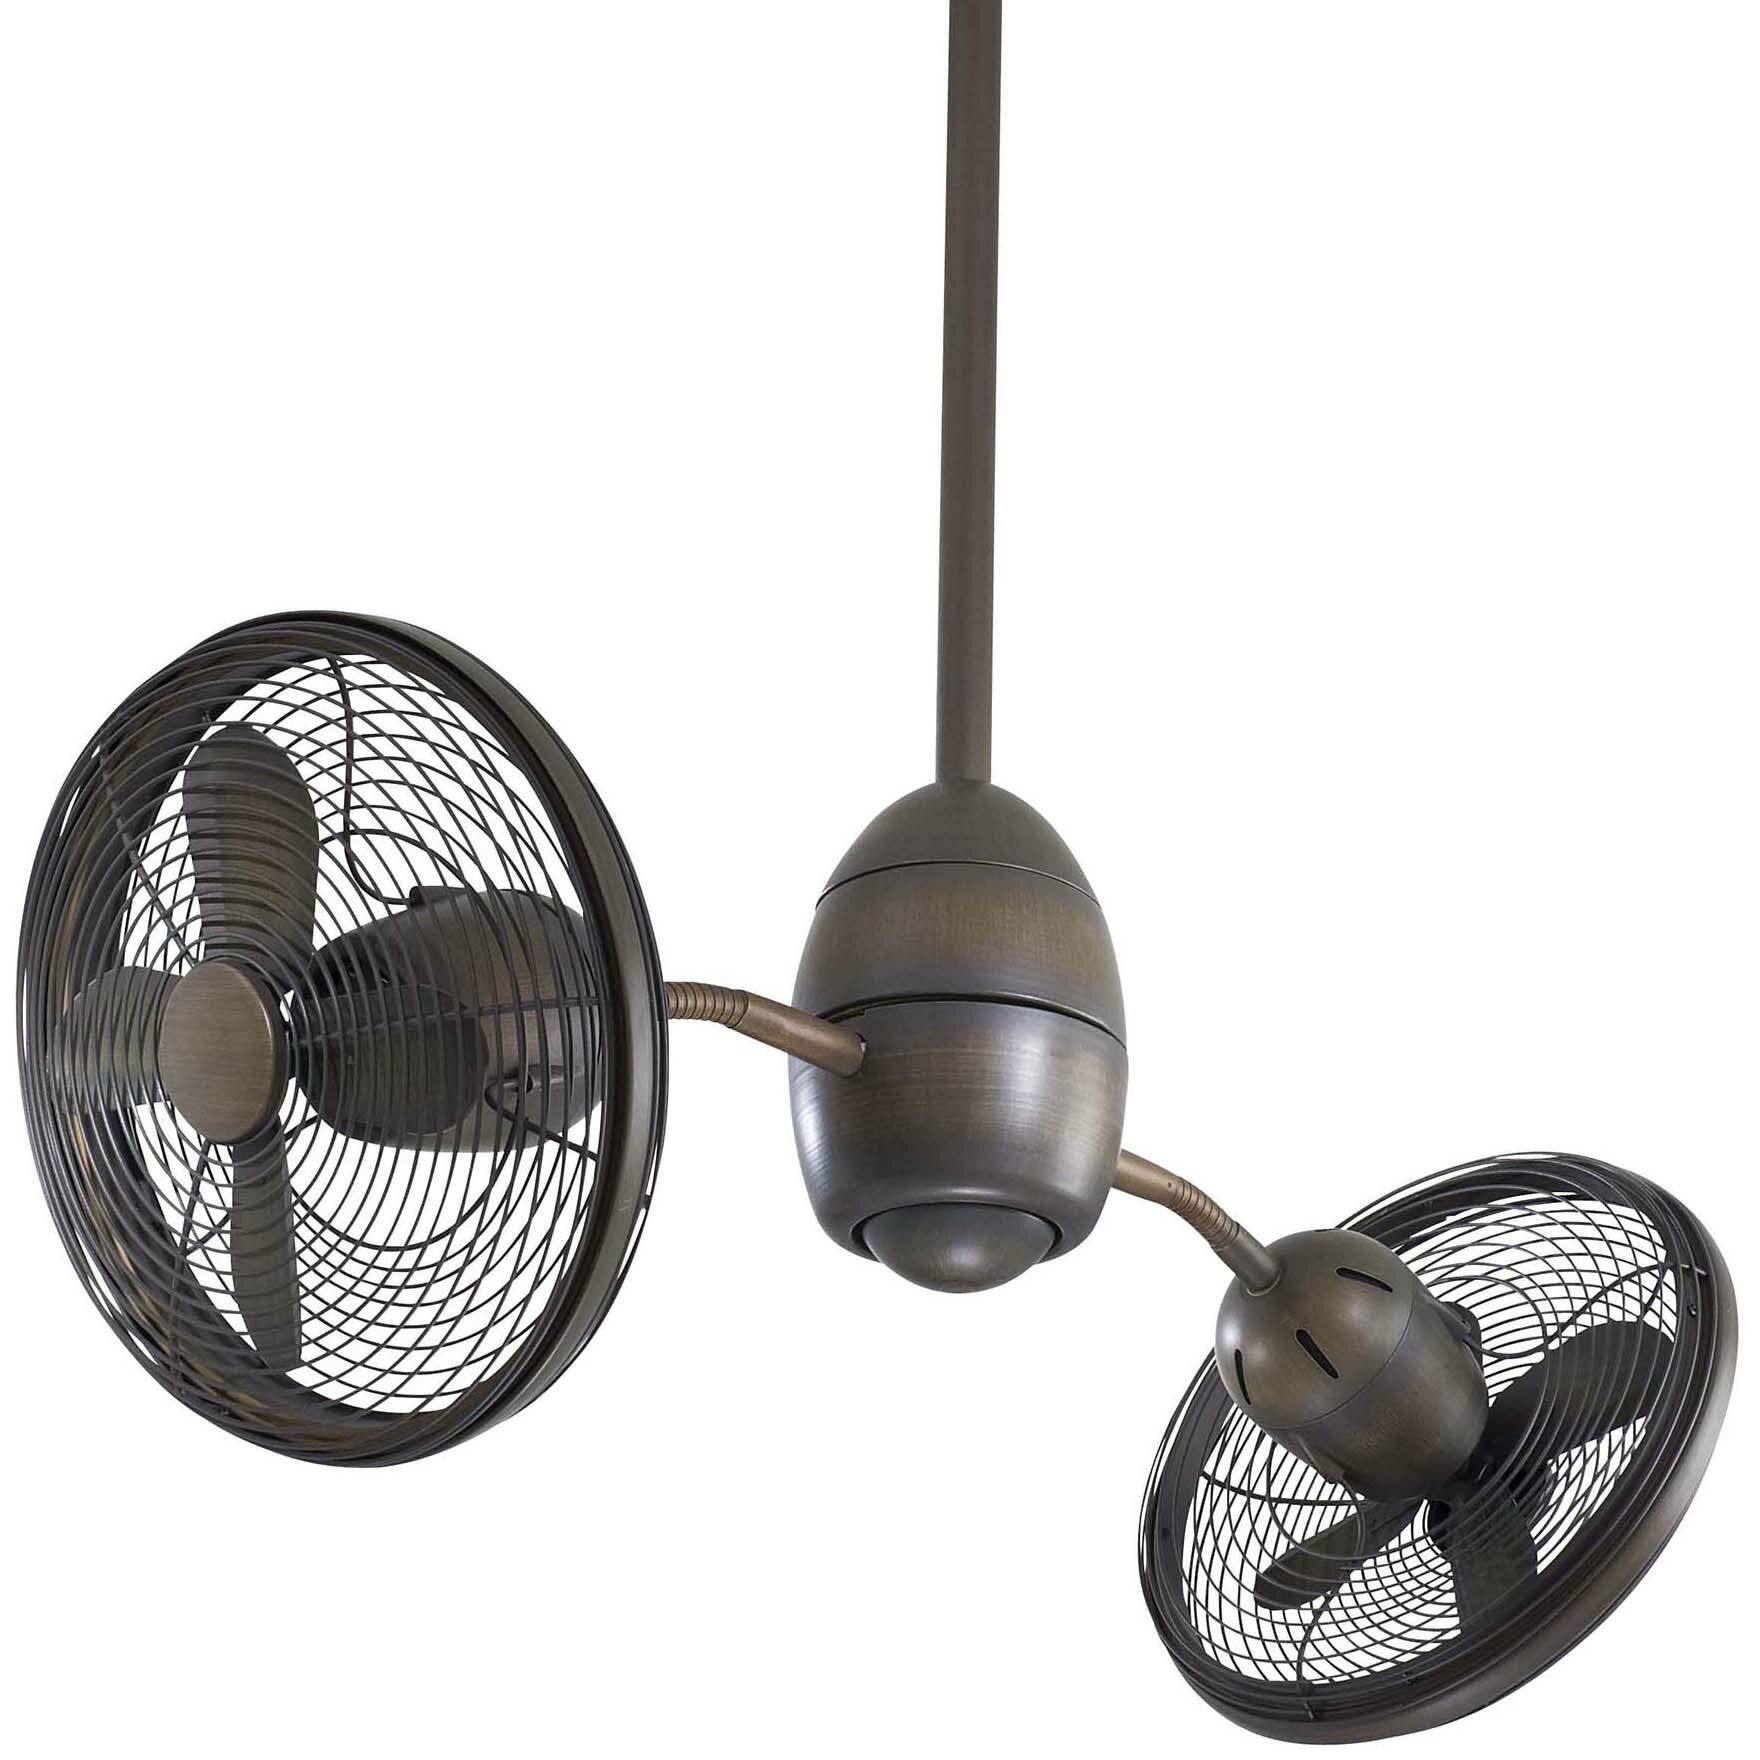 What could be the cause of ceiling fan motor noise?